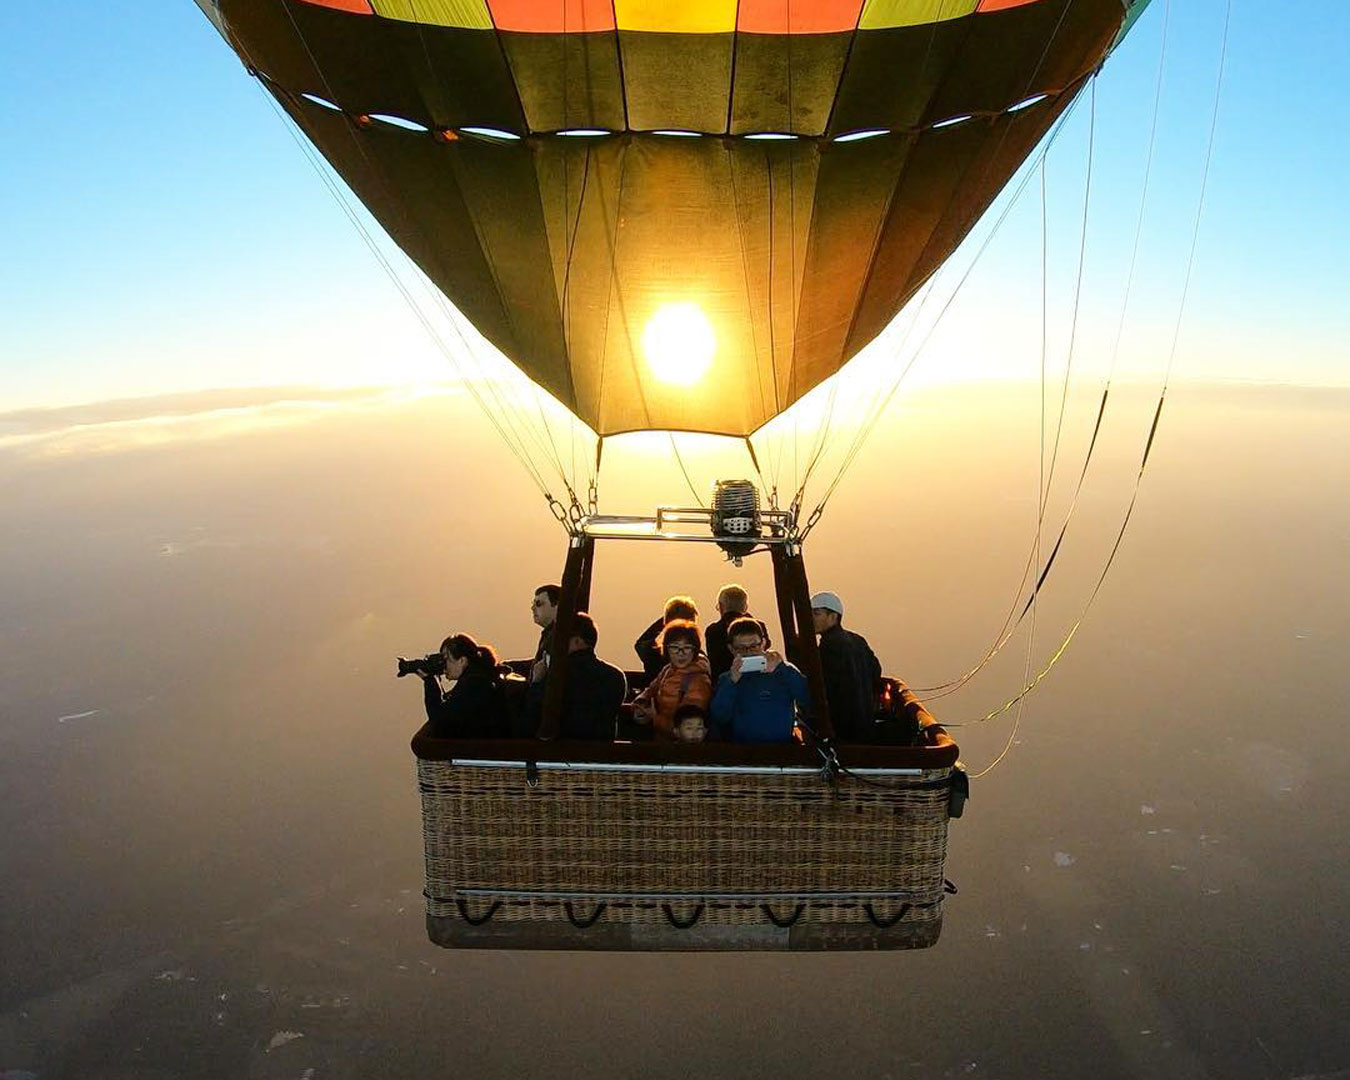 People in hot air balloon